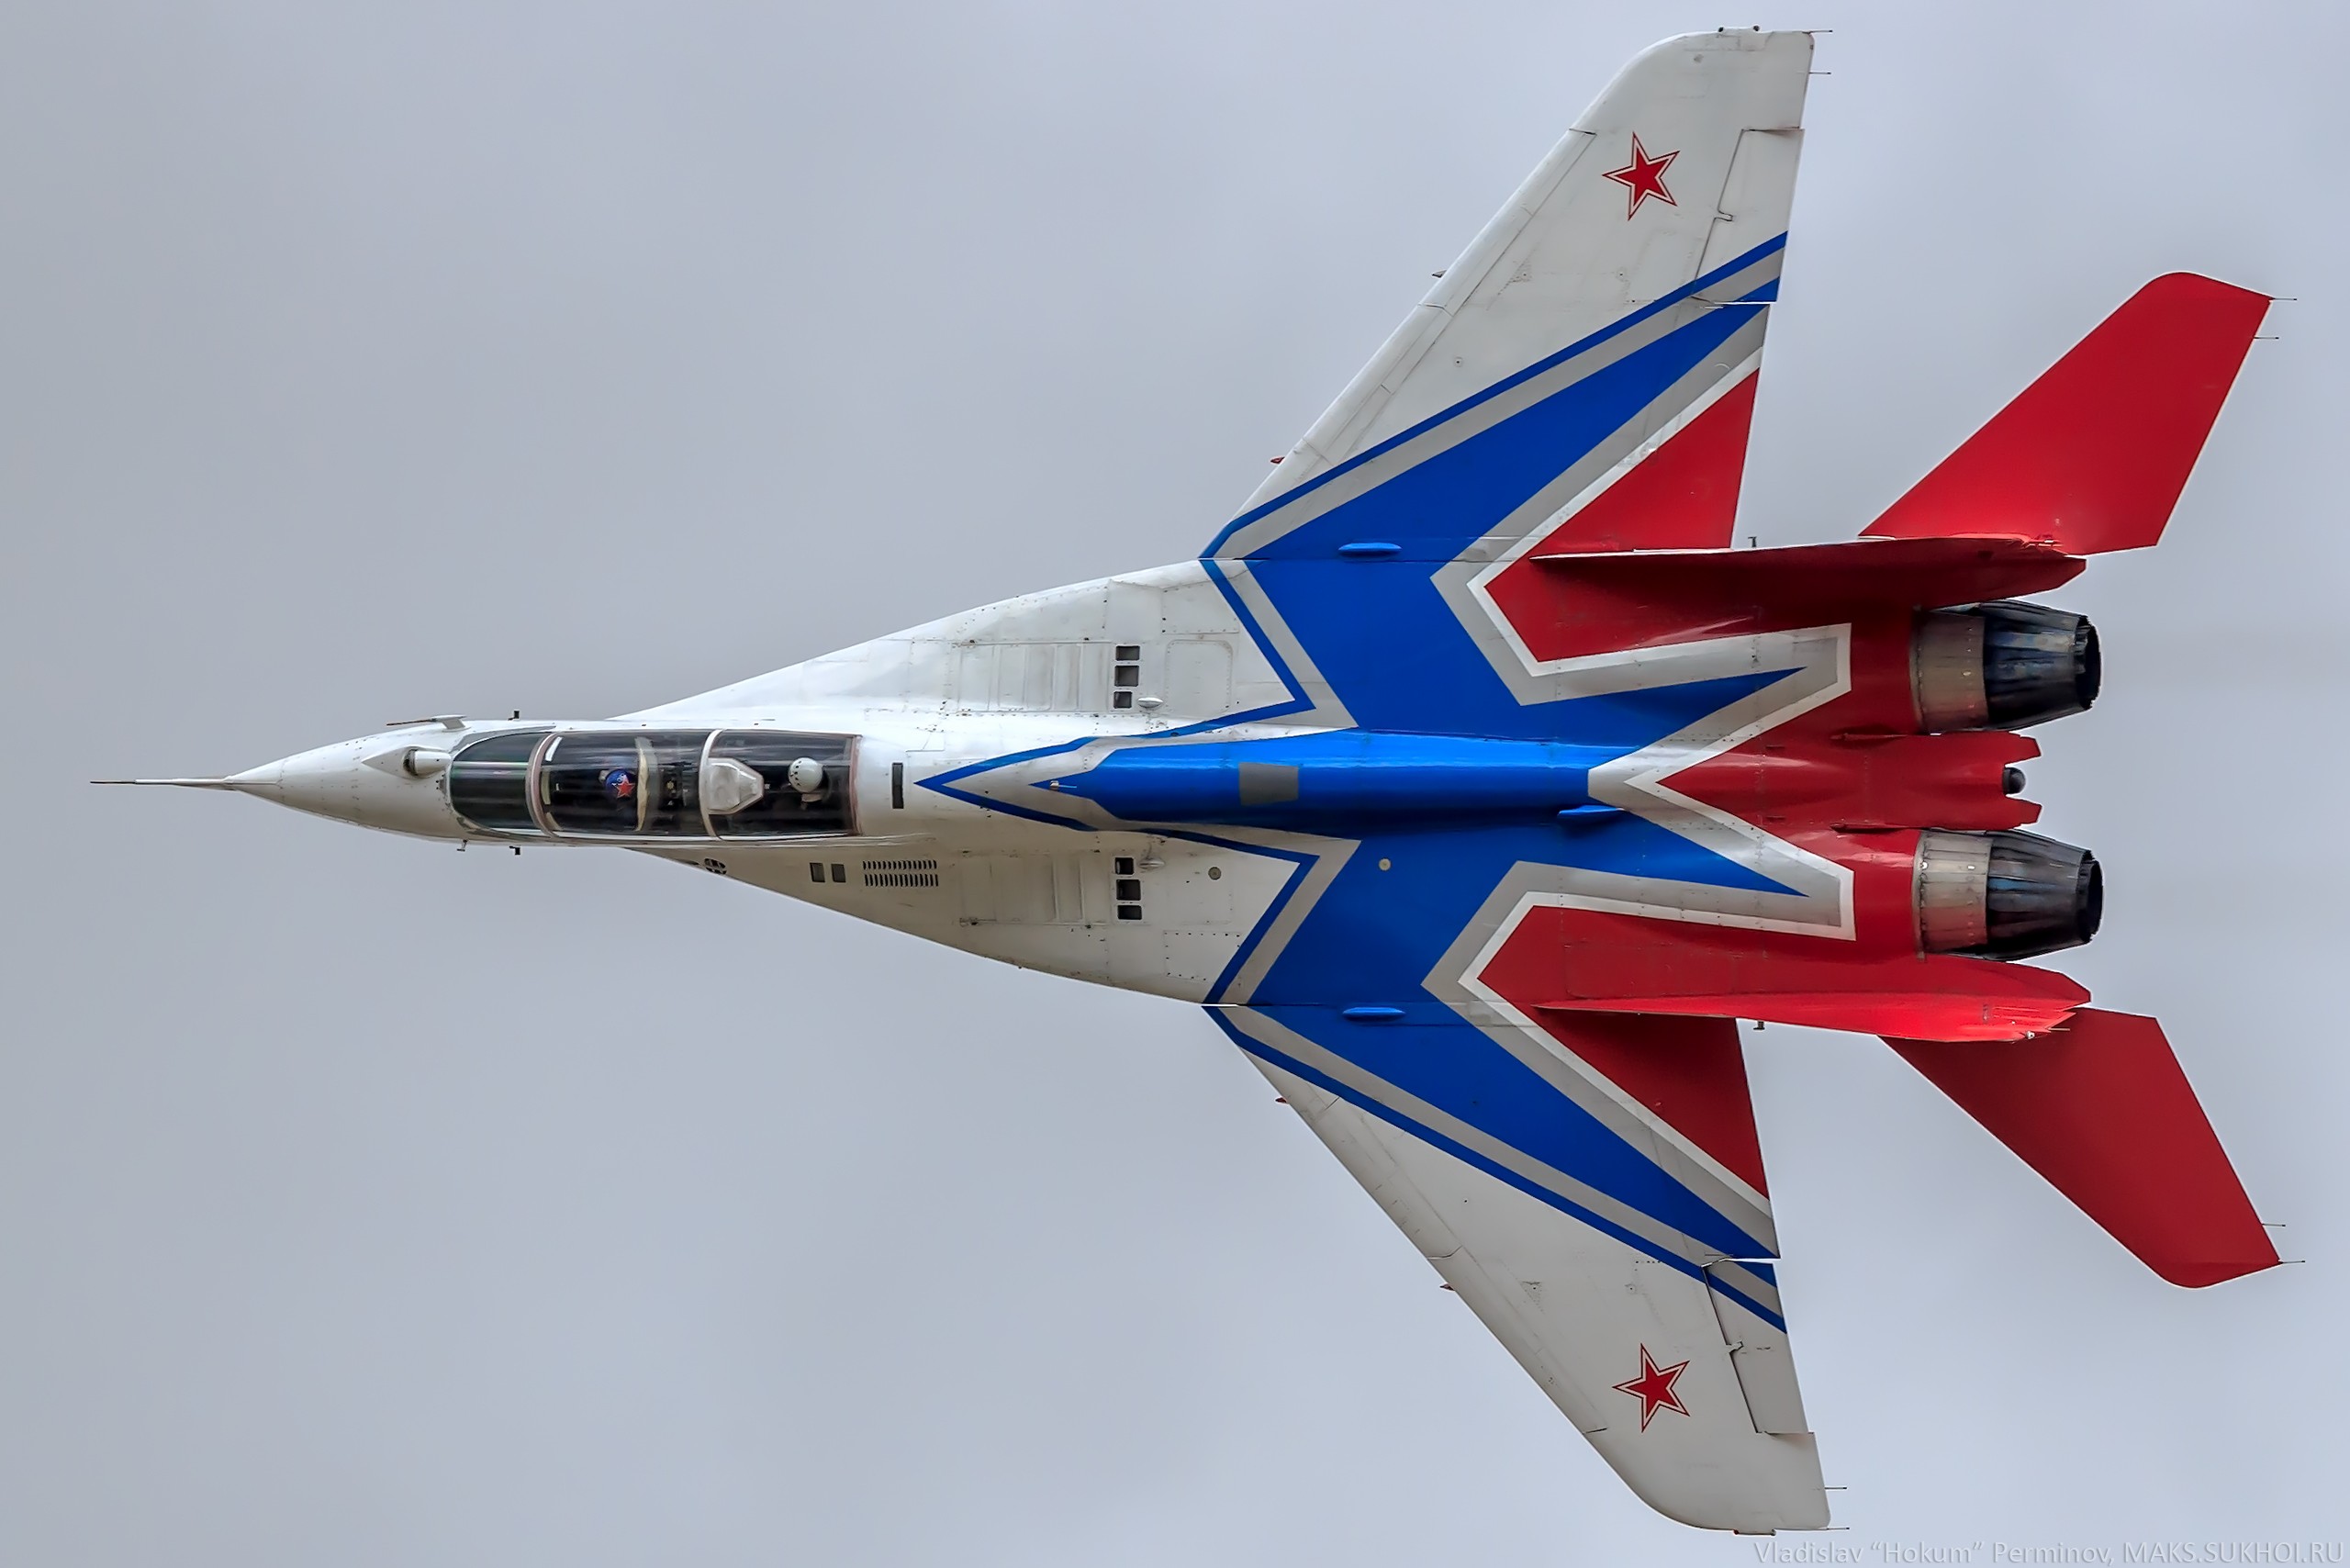 General 2560x1708 aircraft military aircraft military vehicle military vehicle jet fighter Russian Air Force Mikoyan MiG-29 Swifts aerobatic team top view Russian/Soviet aircraft Mikoyan-Gurevich